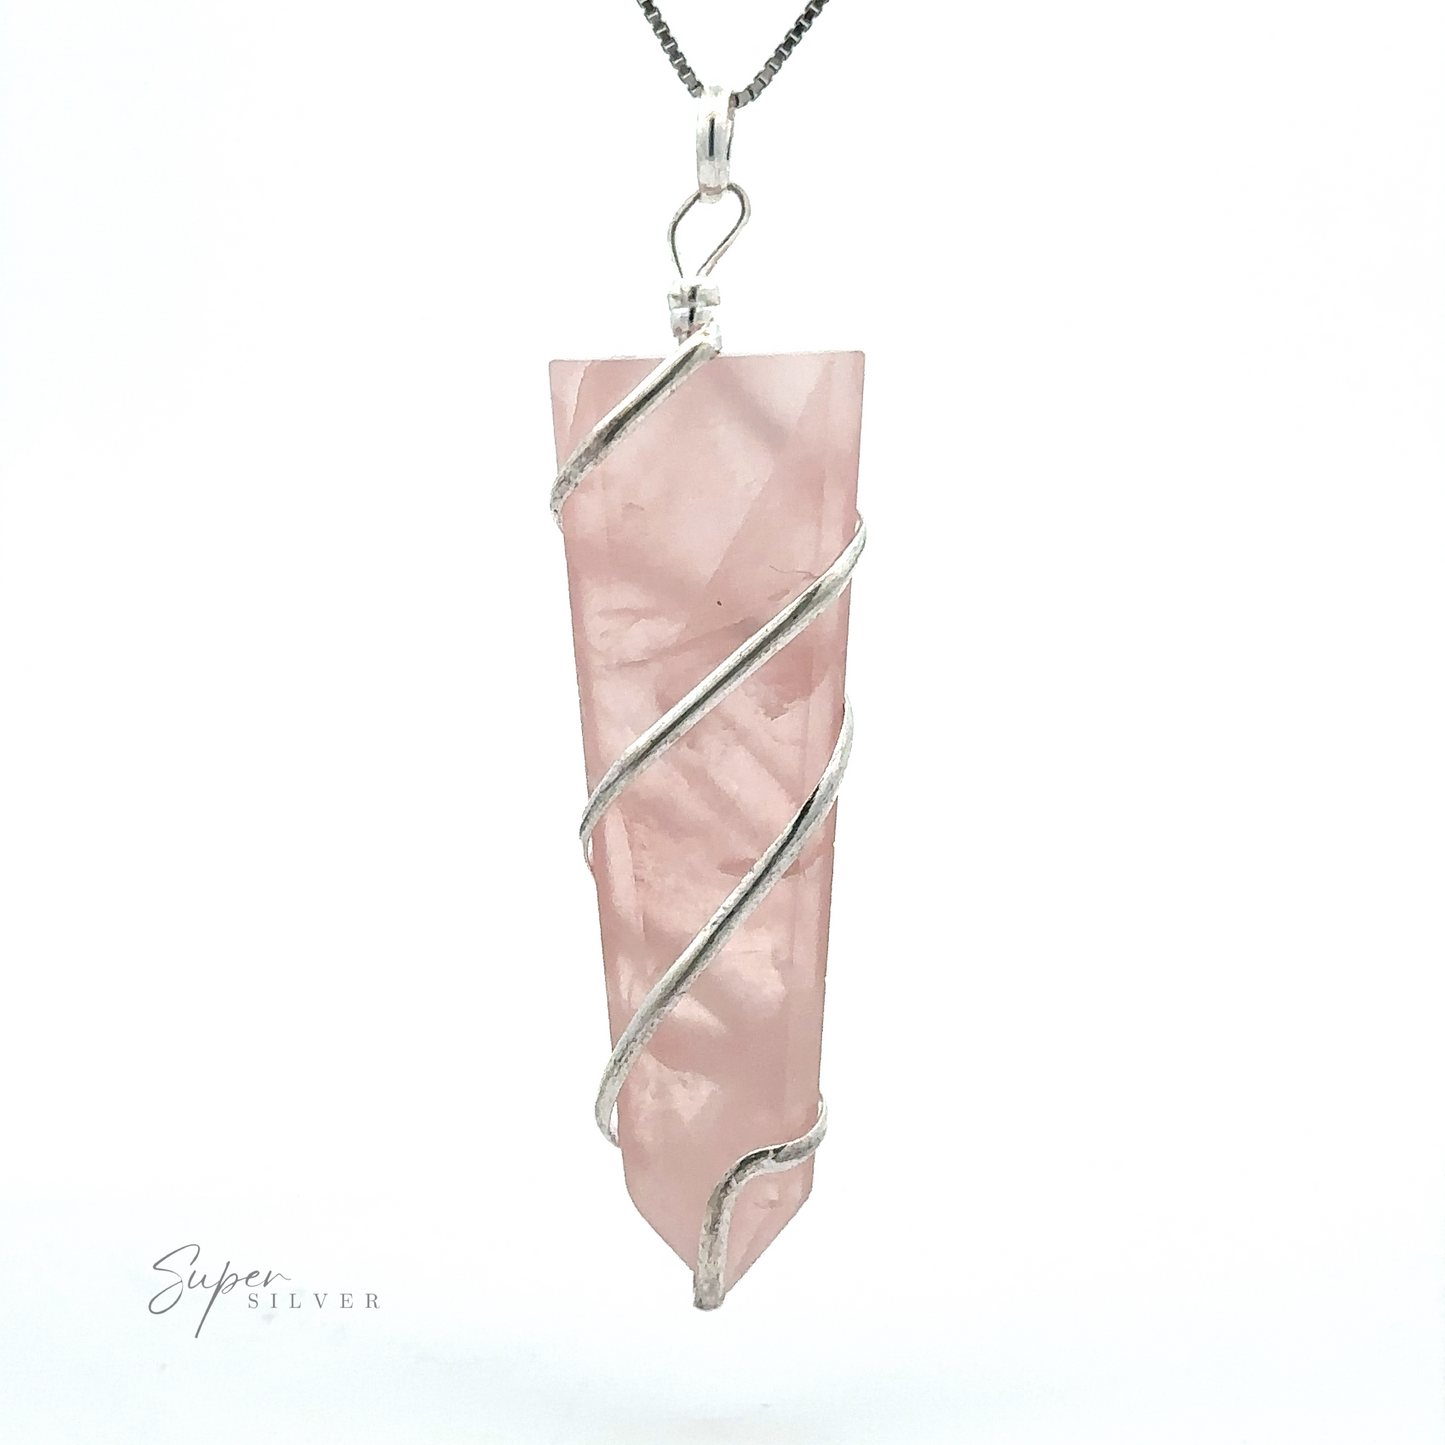 
                  
                    A Wire Wrapped Slab Pendant featuring a rose quartz crystal encased in a silver design, hanging from a thin chain, exemplifying exquisite gemstone jewelry craftsmanship.
                  
                